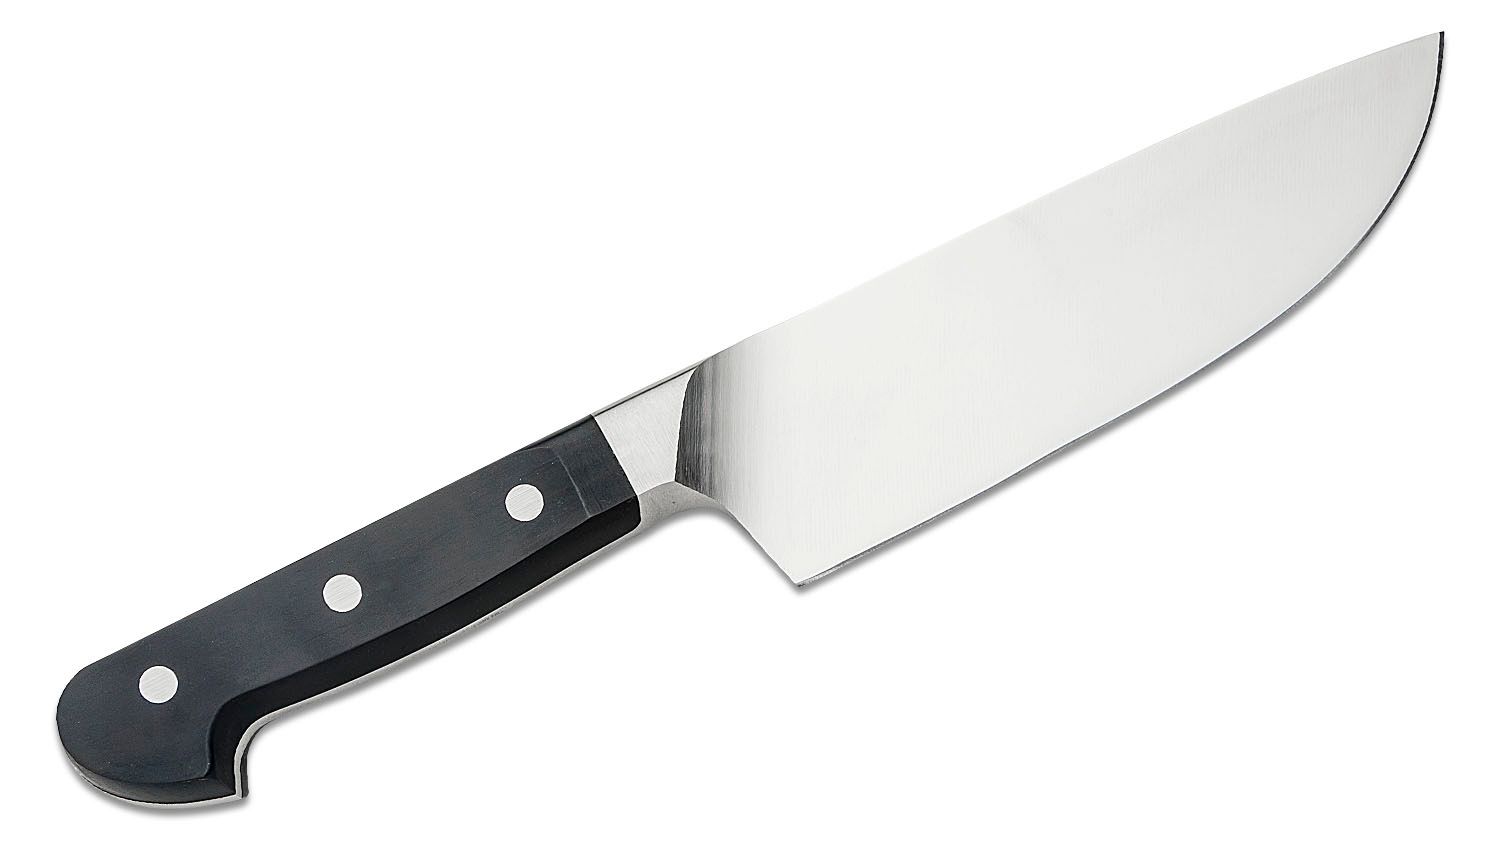 J.A. Henckels Pro 6 Wide Chef Knife - Cooks